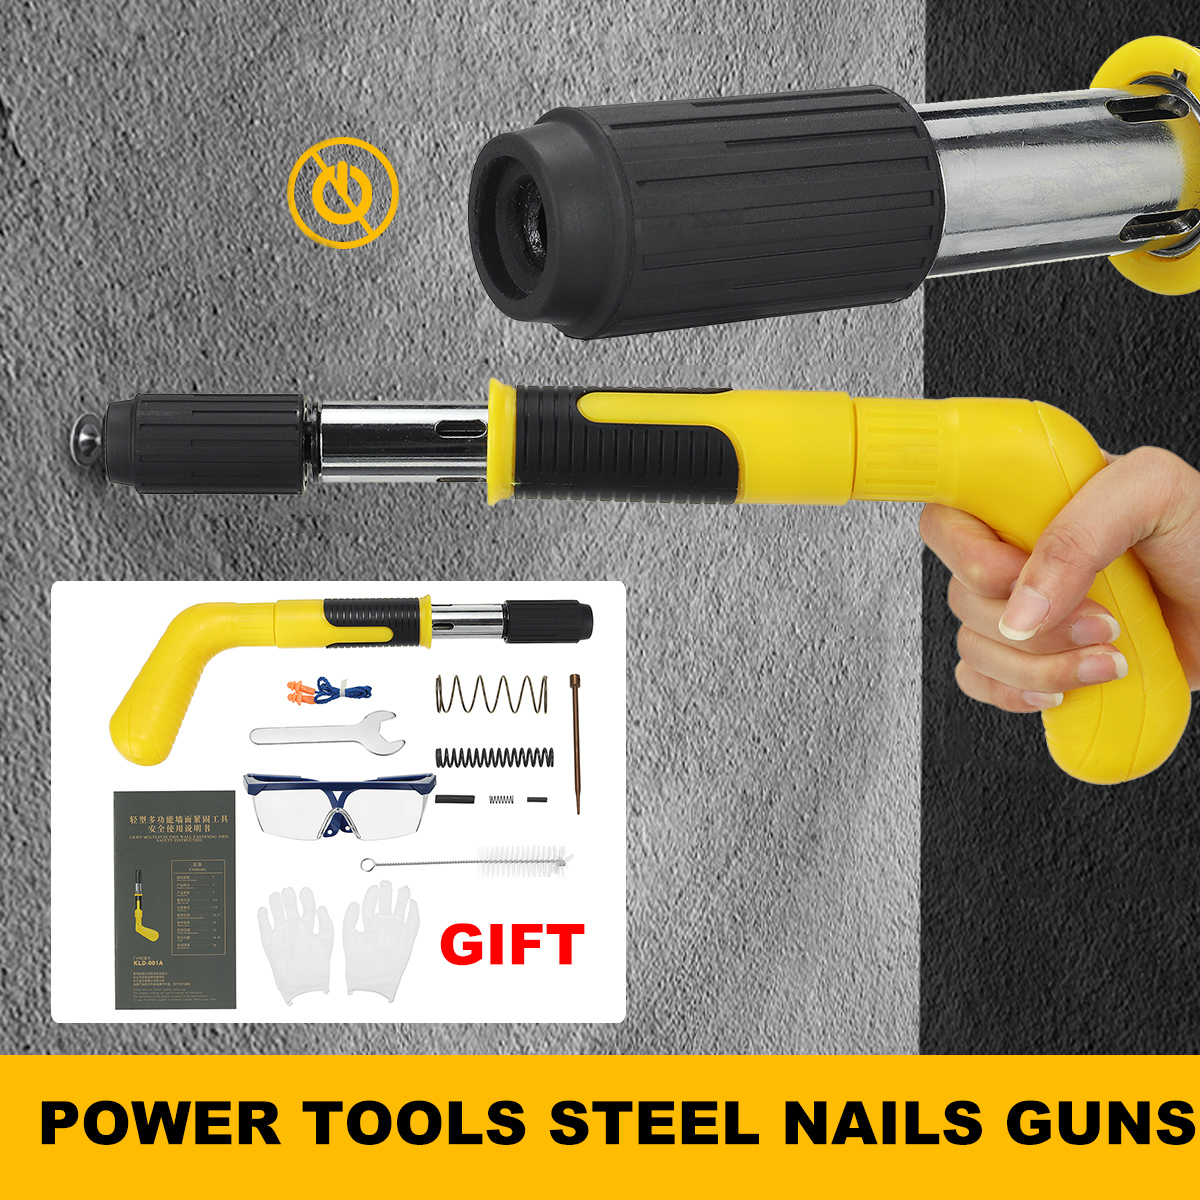 Electric-Nail-Guns-Electric-Staple-Straight--Rechargeable-Automatic-25mm-Special-Use-Wood-Working-To-1900733-1